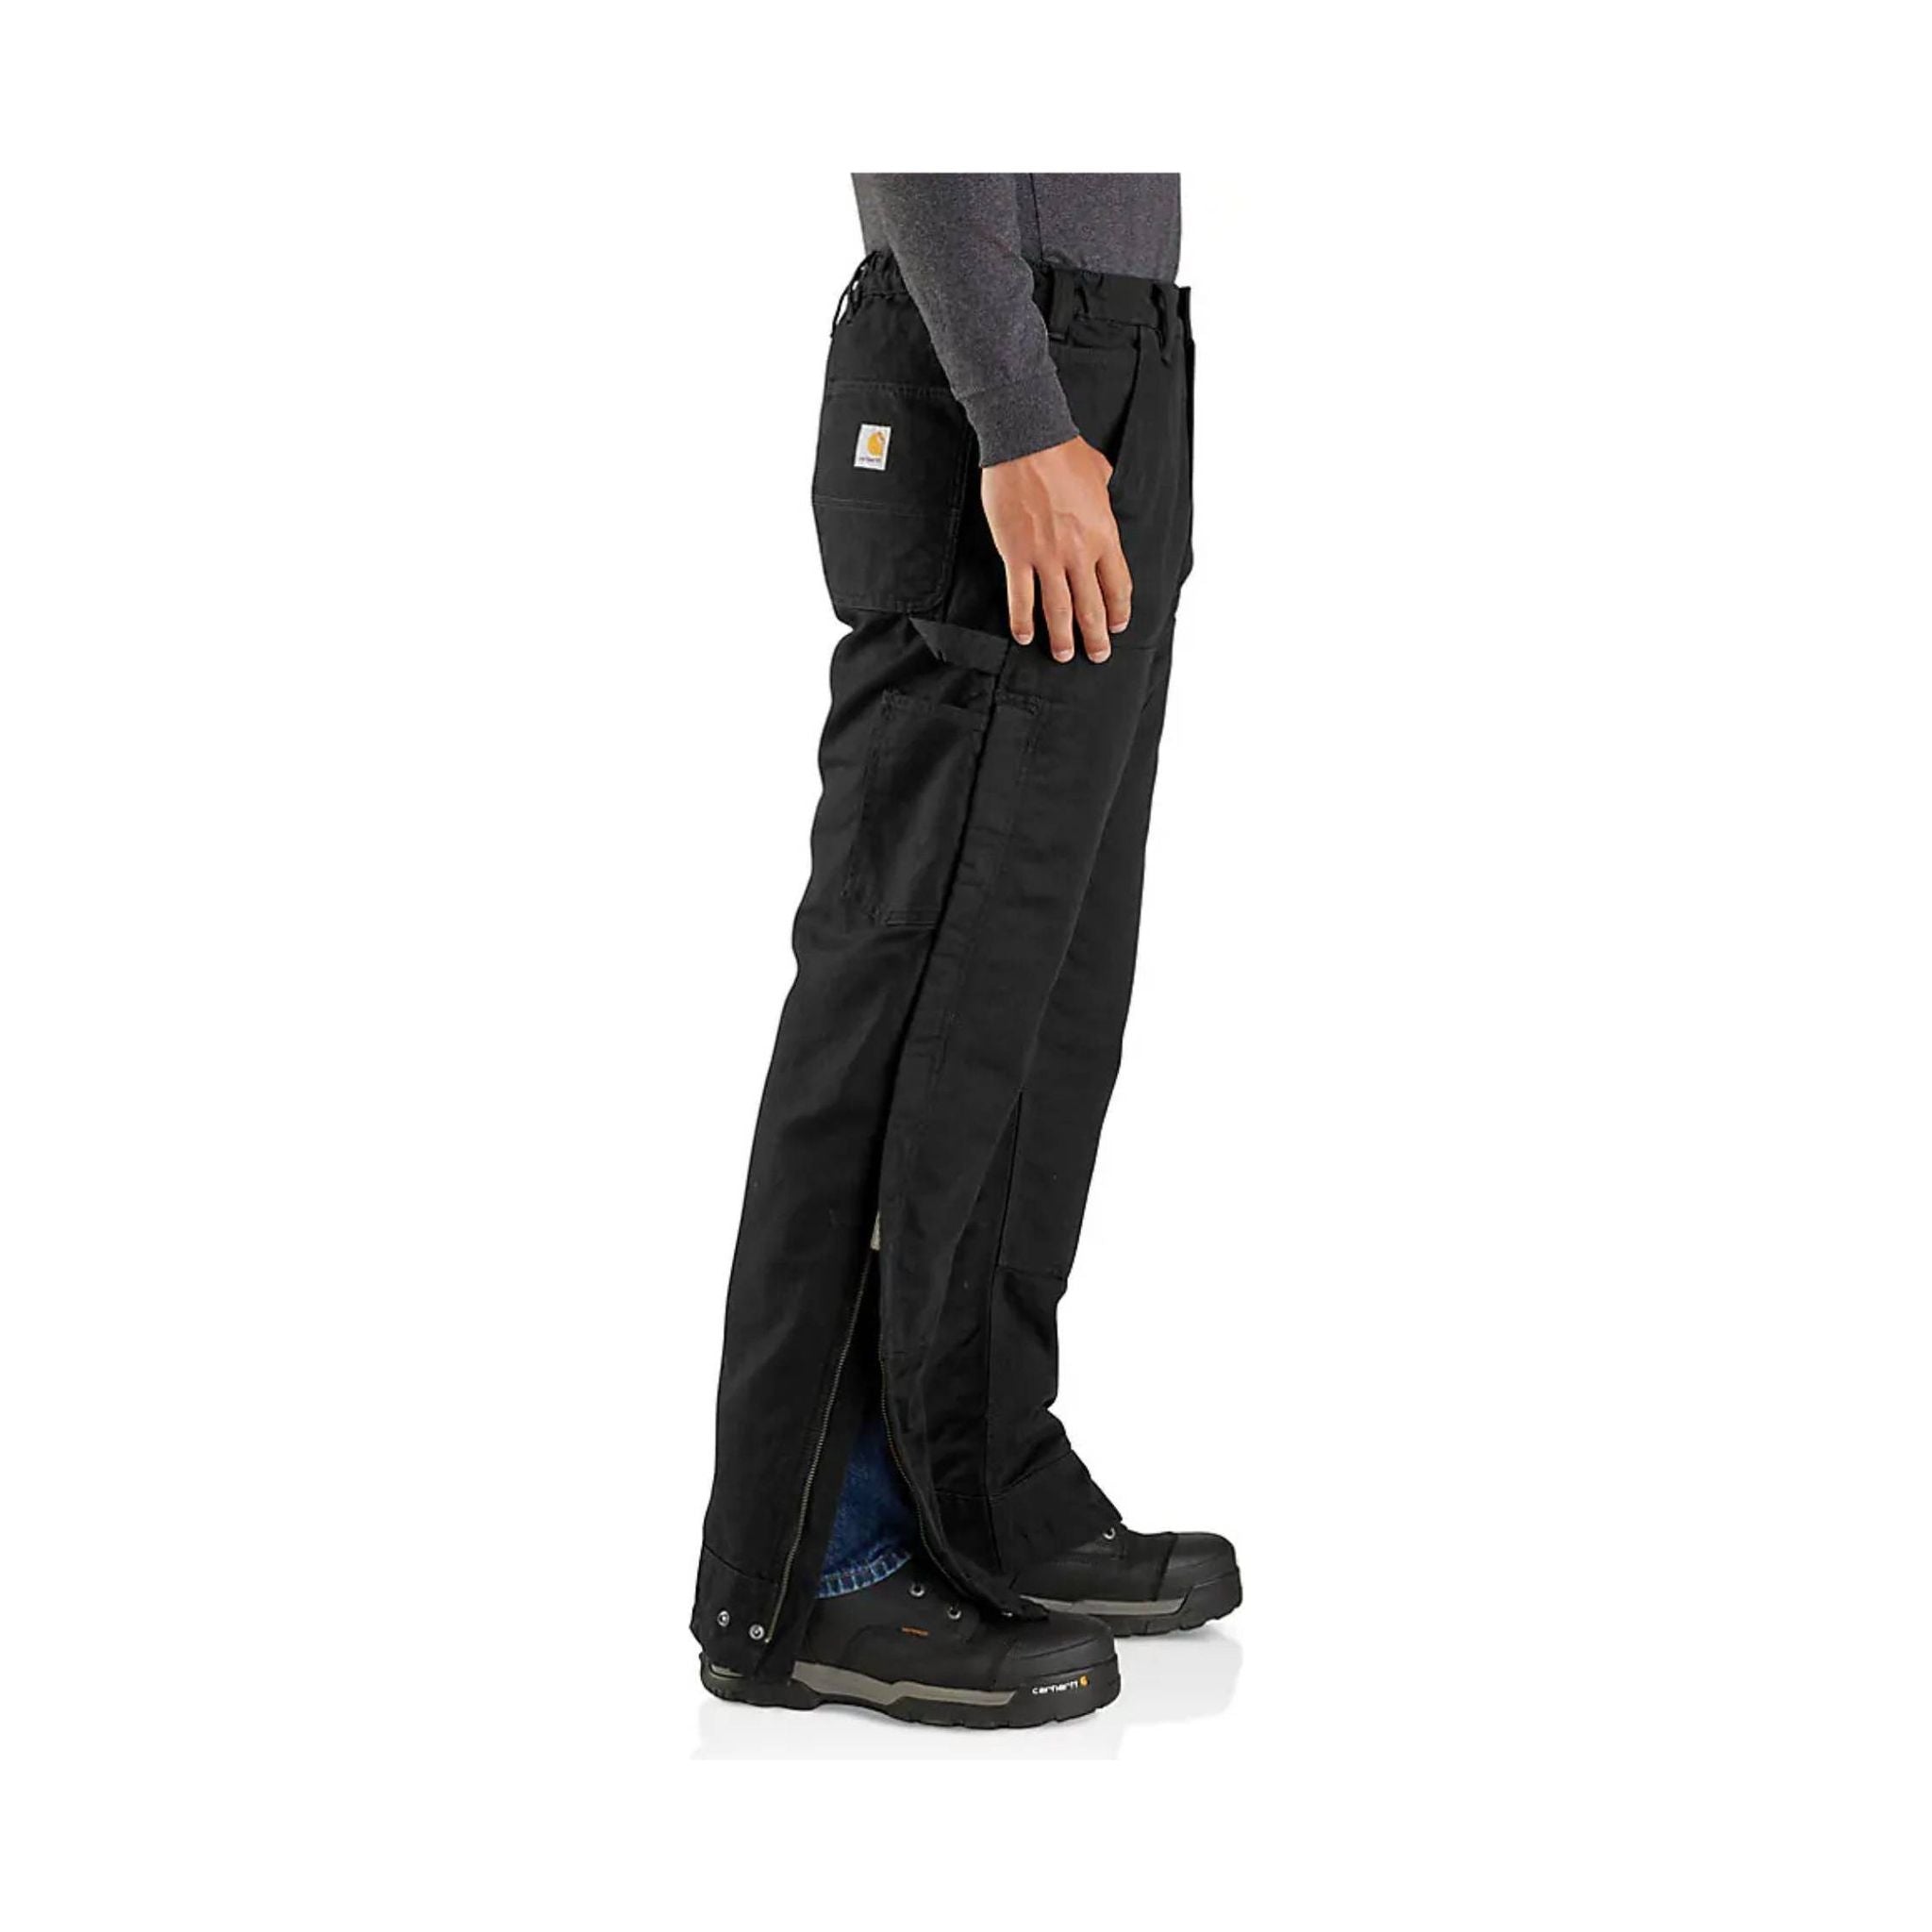 Carhartt Men's Loose Fit Washed Duck Insulated Pant - Black